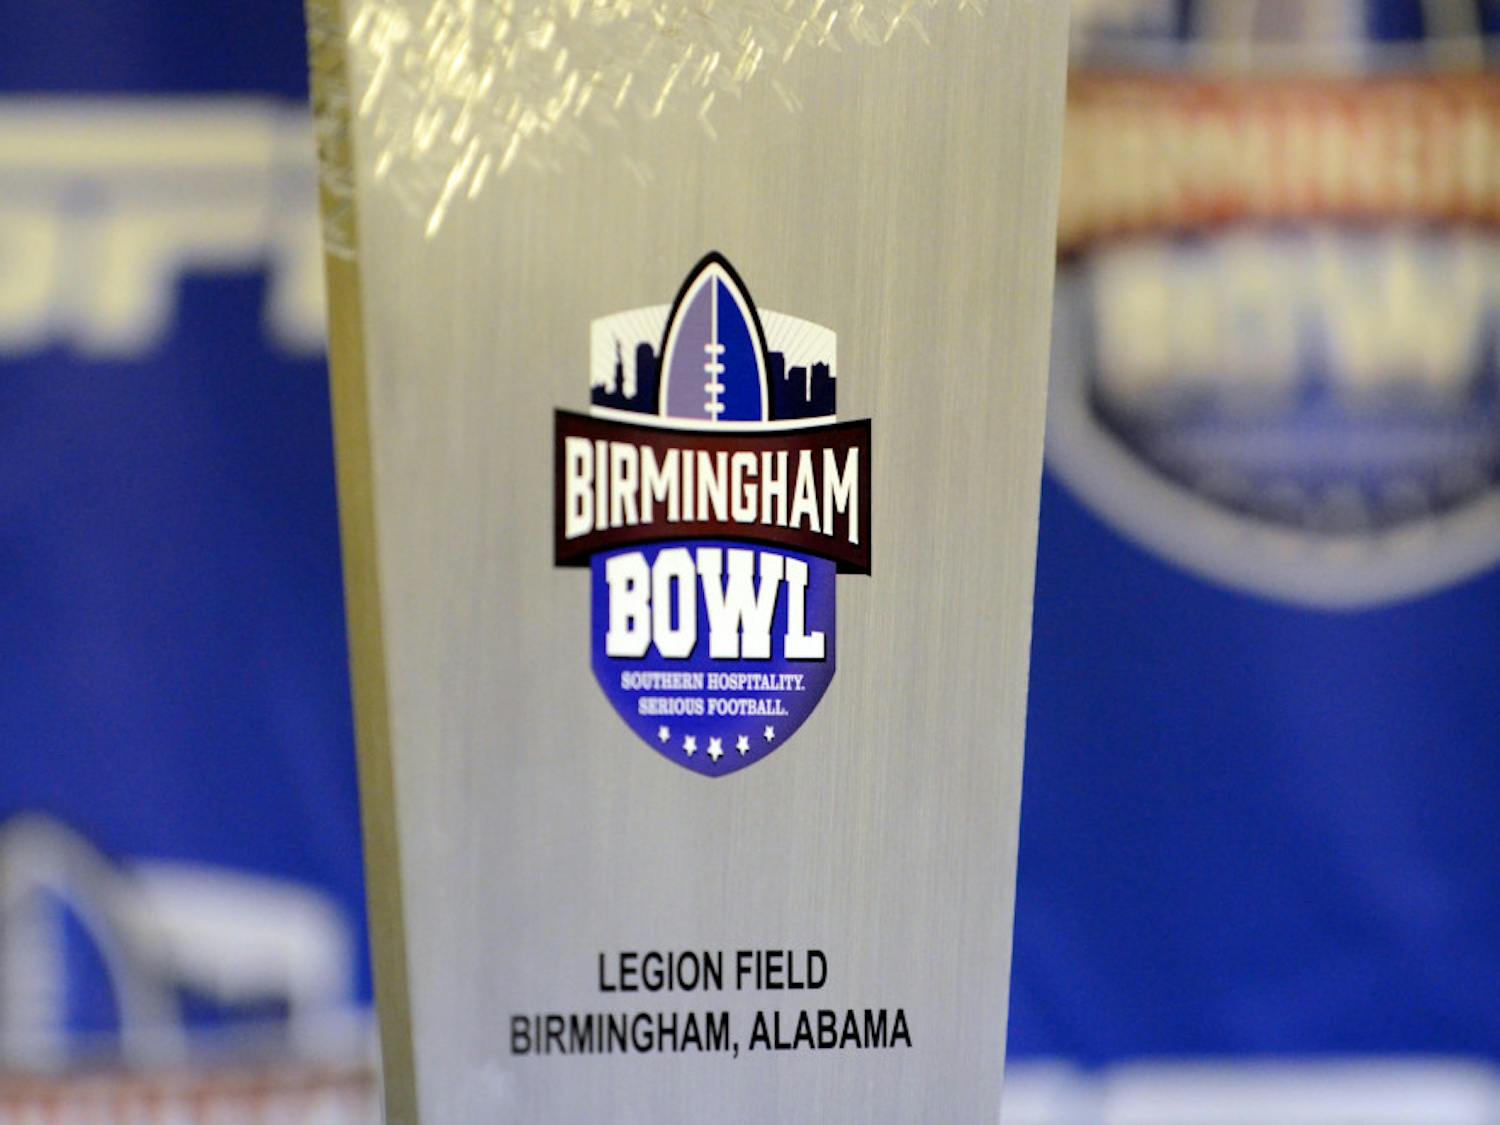 The Florida Gators and East Carolina Pirates previewed the upcoming Birmingham Bowl at Friday's press conference. Florida (6-5) was represented by interim head coach D.J. Durkin, center Max Garcia and linebacker Mike Taylor. East Carolina (8-4) was represented by head coach Ruffin McNeill, quarterback Shane Carden, wide receiver Justin Hardy, defensive lineman Chrishon Rose and linebacker Brandon Williams.